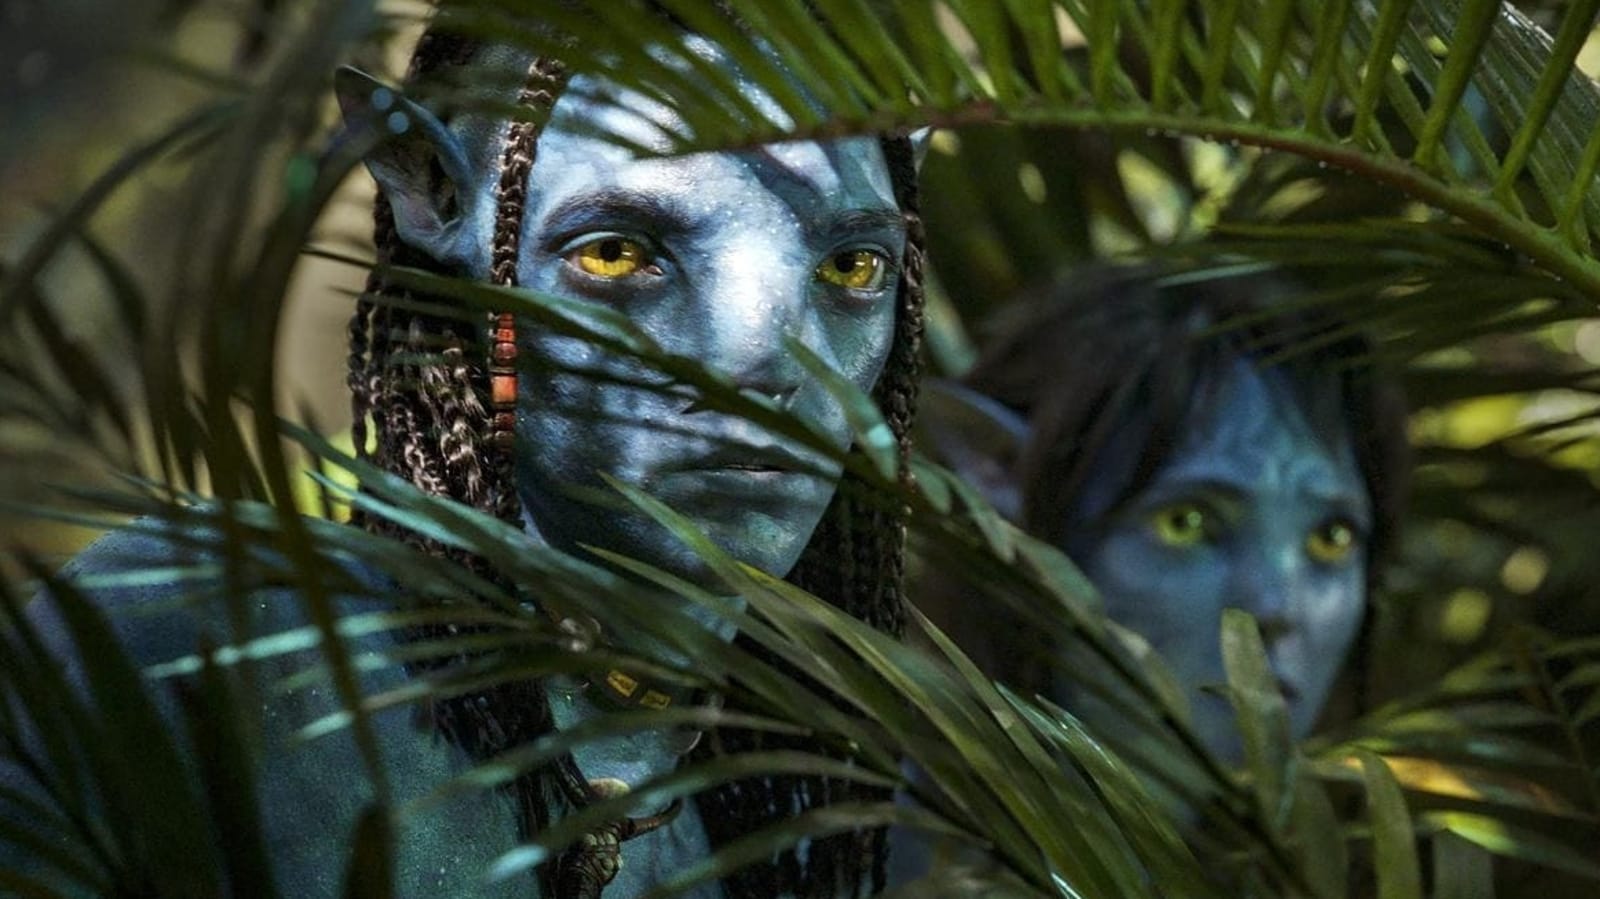 Avatar The Way of Water set to cross $1 bn in just 12 days, closer to becoming 3rd highest-grossing film of 2022: Report